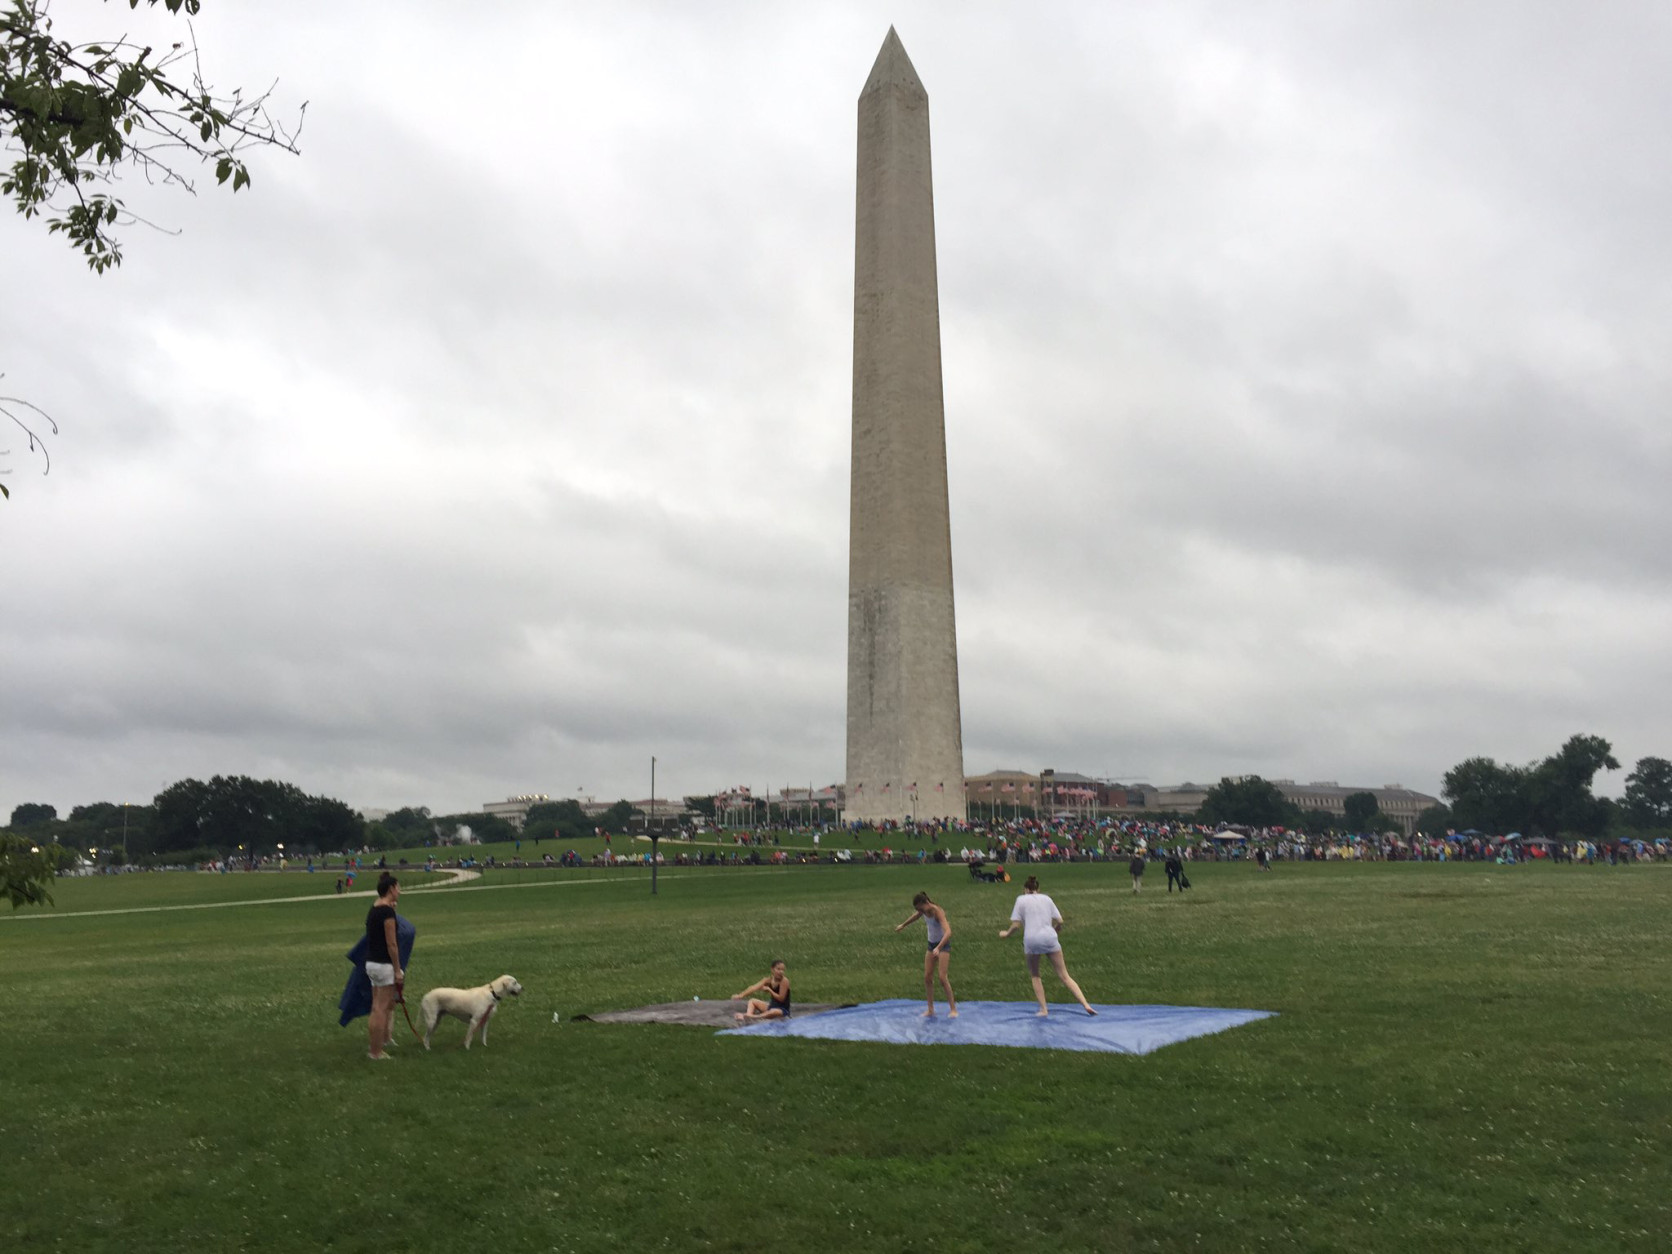 People waiting for fireworks at the National Mall made the best of the rainy weather by creating a makeshift "slip and slide" on Monday, July 4, 2016. (WTOP/Michelle Basch)